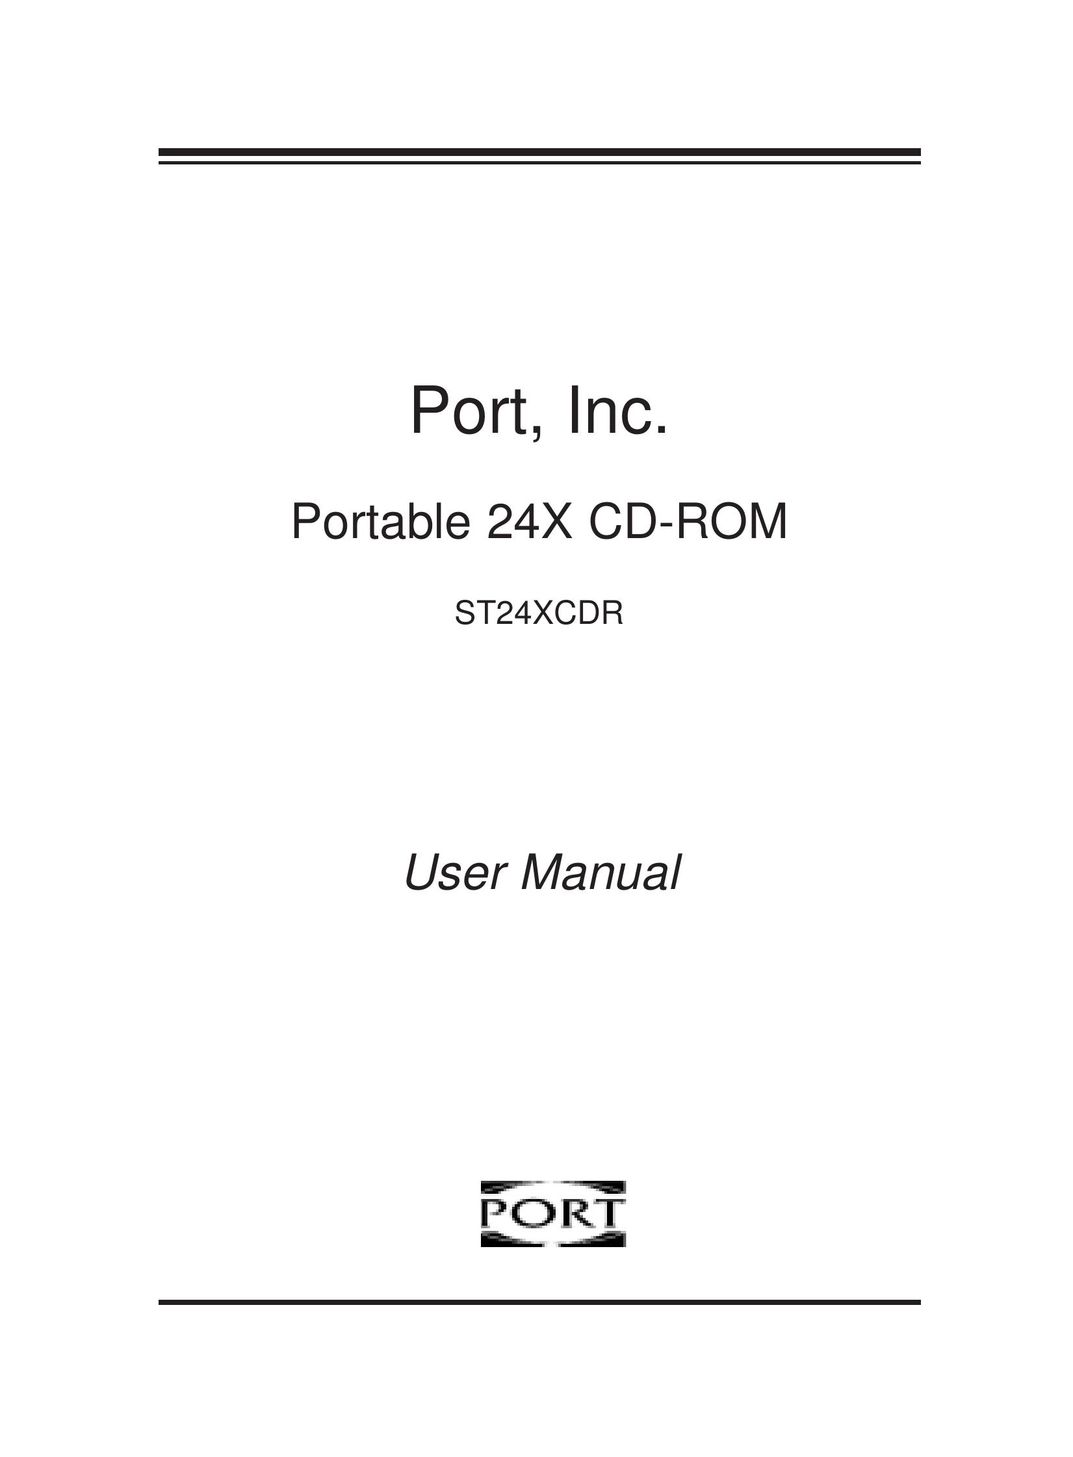 PORT ST24XCDR CD Player User Manual